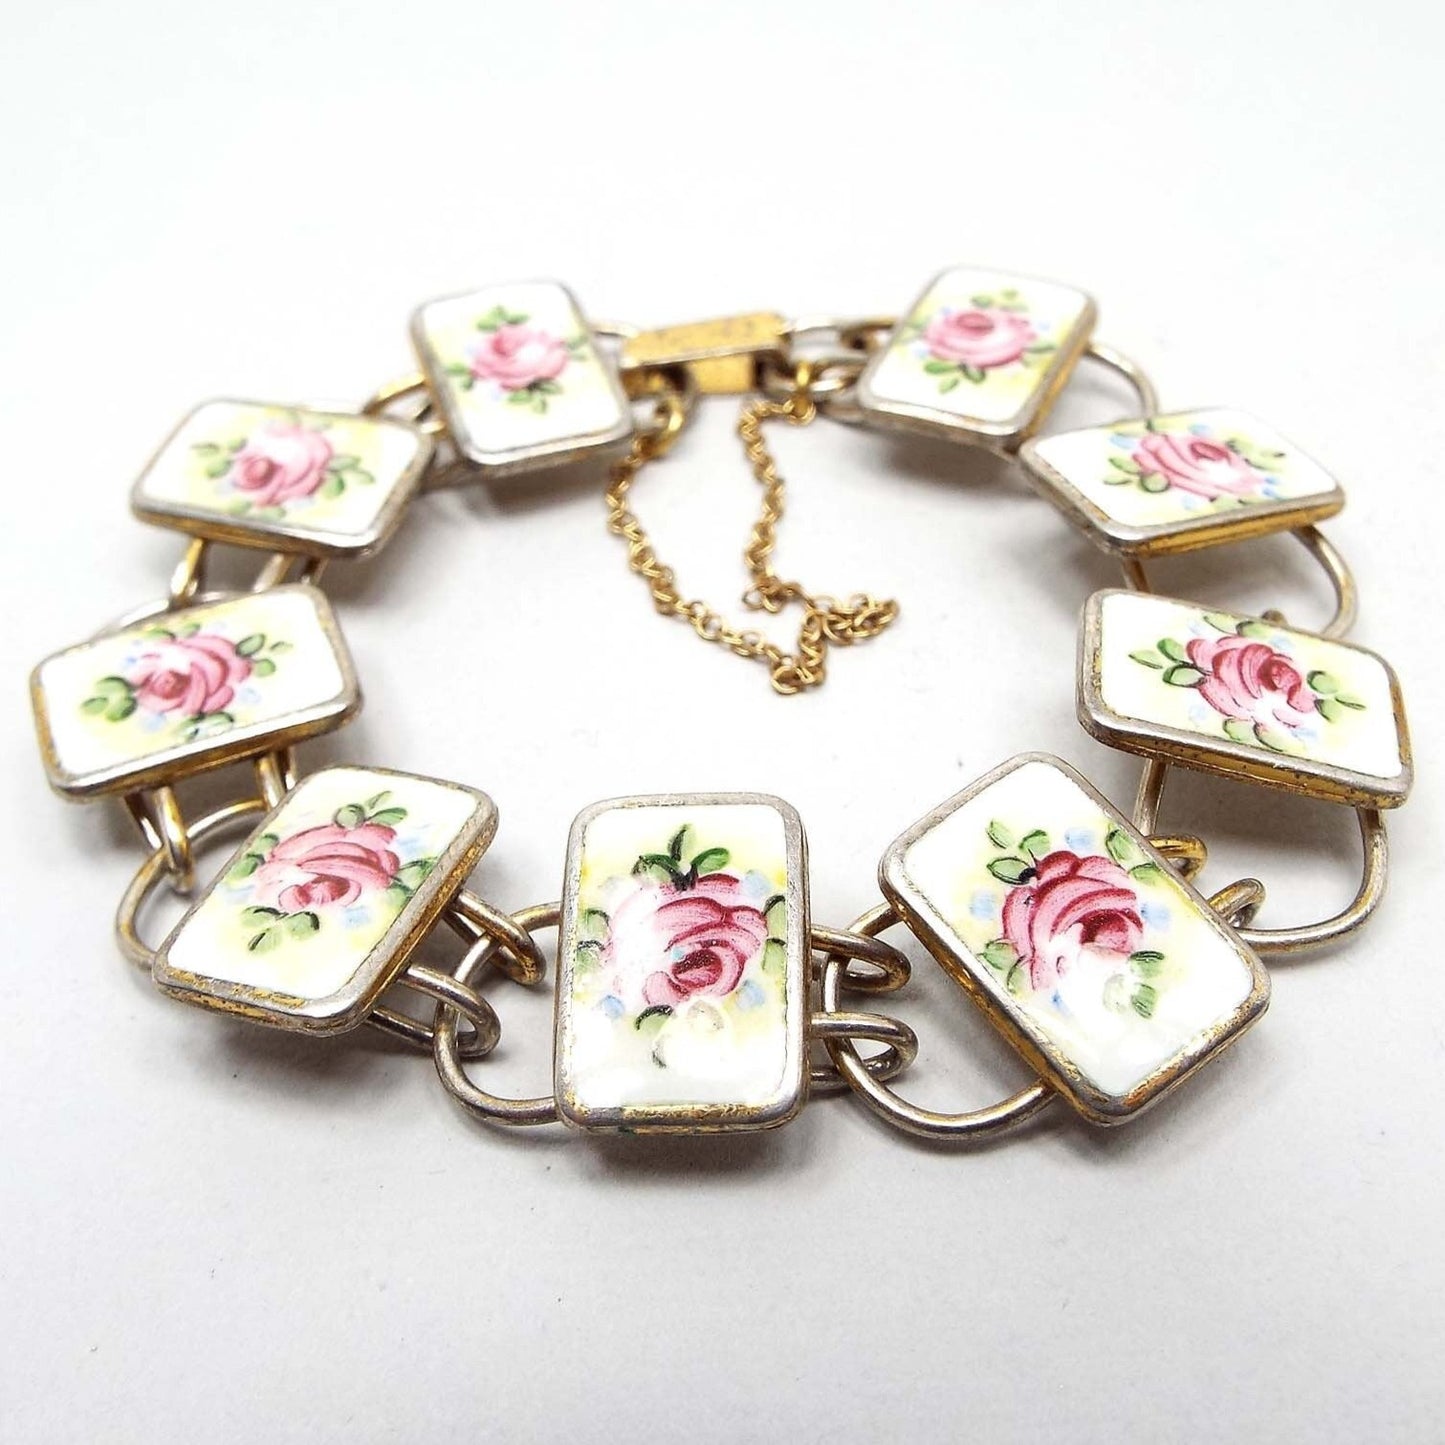 Top view of the Mid Century vintage Bliss Brothers floral bracelet. The snap lock clasp, safety chain, and some areas of the rectangle links are vermeil gold plated over sterling. The rest is silver in color. There is wear the the plating seen around the edges of the links and clasp. The porcelain cabs are white with pink roses with green leaves painted on them.